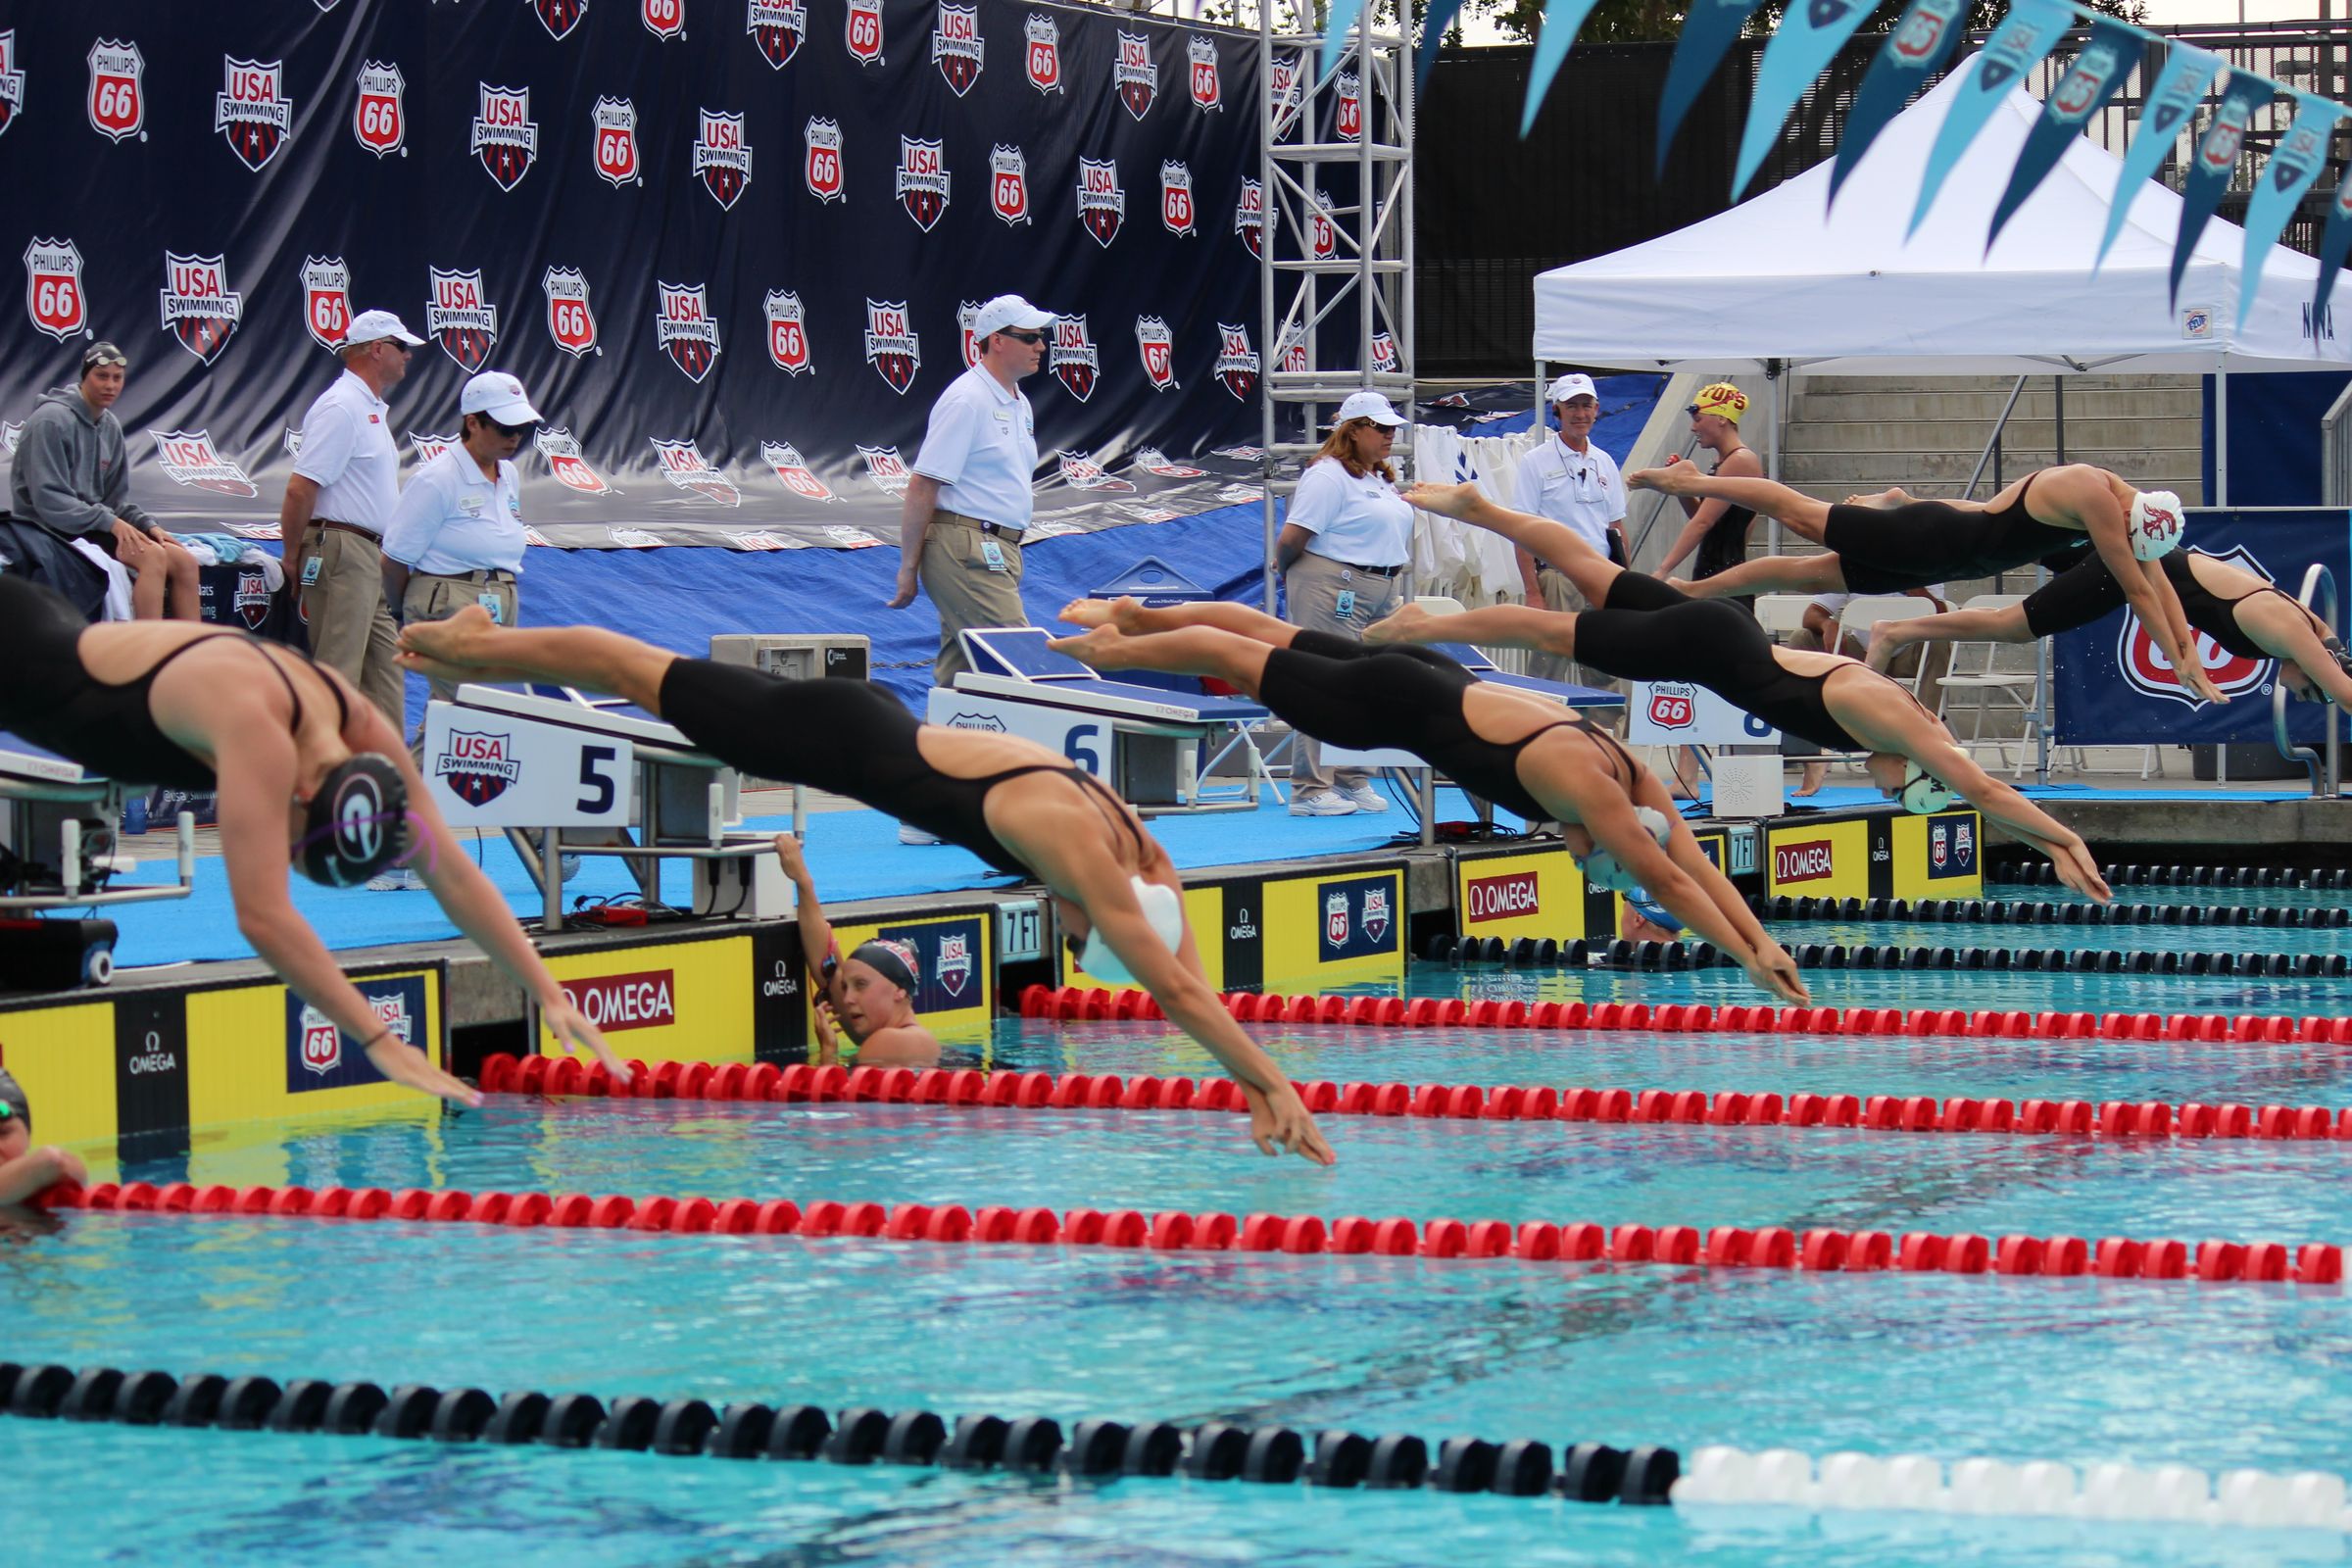 Race Day Video Recapping Highlights From Day Three At USA Swimming Nationals Swimming news